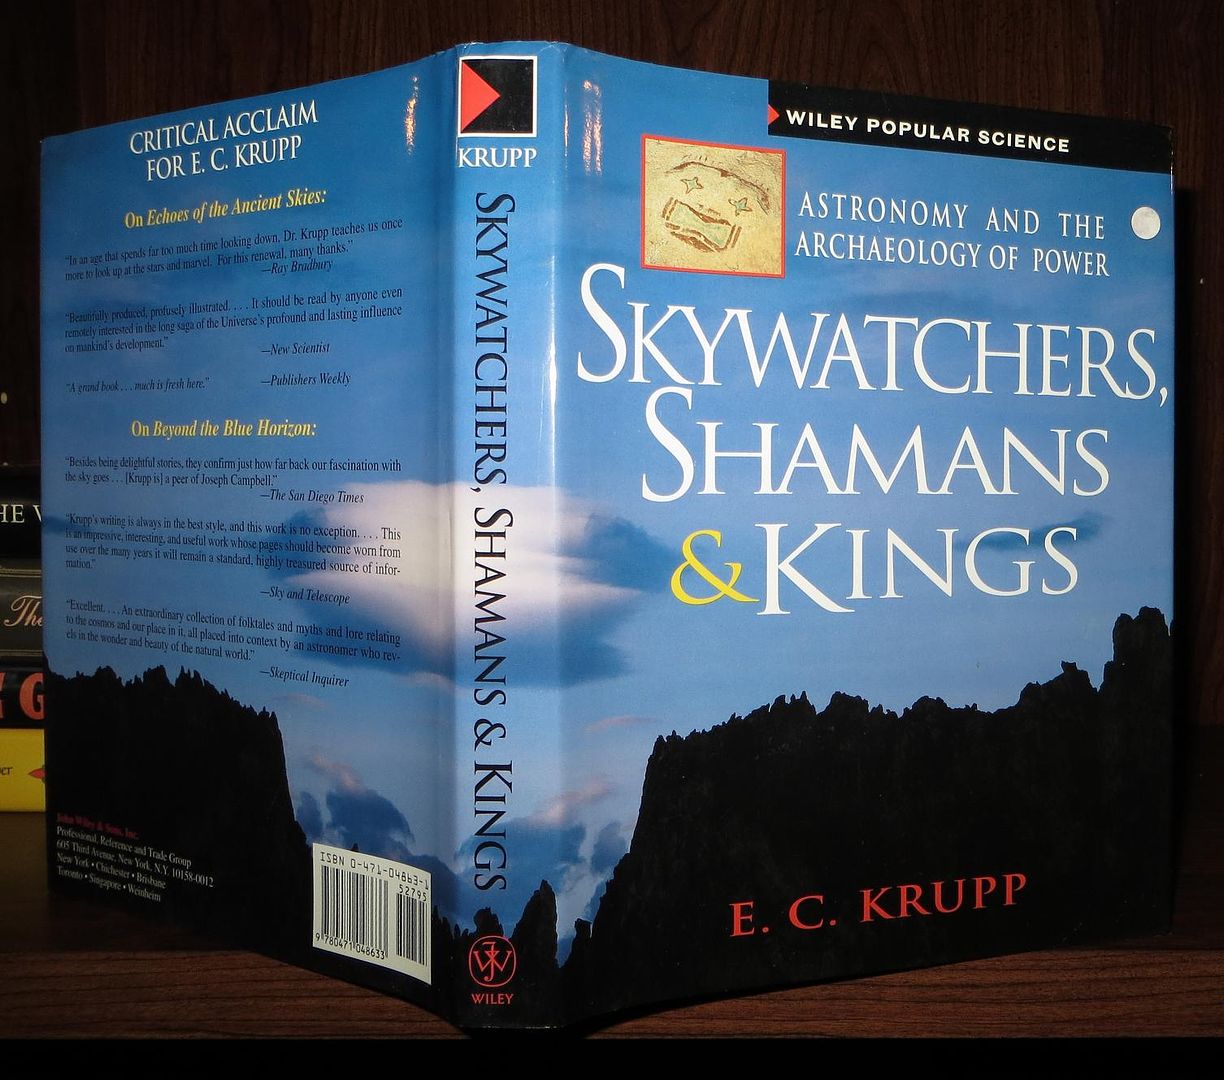 KRUPP, E. C. - Skywatchers, Shamans & Kings Astronomy and the Archaeology of Power